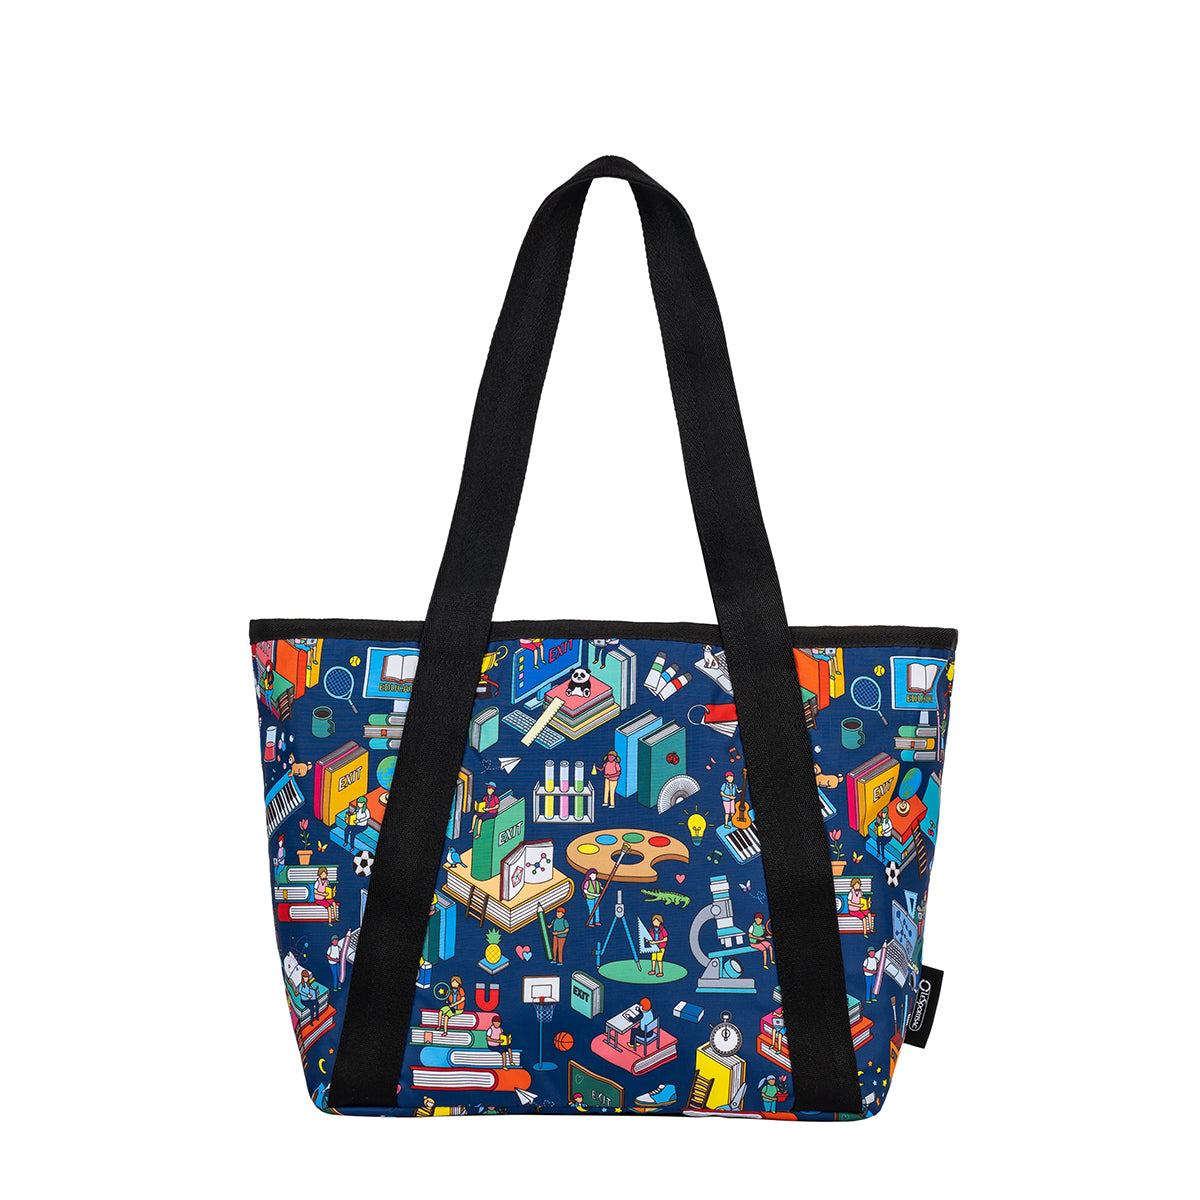 EXIT YUME BOKIN - Everyday Easy Tote – ExLeSpoT